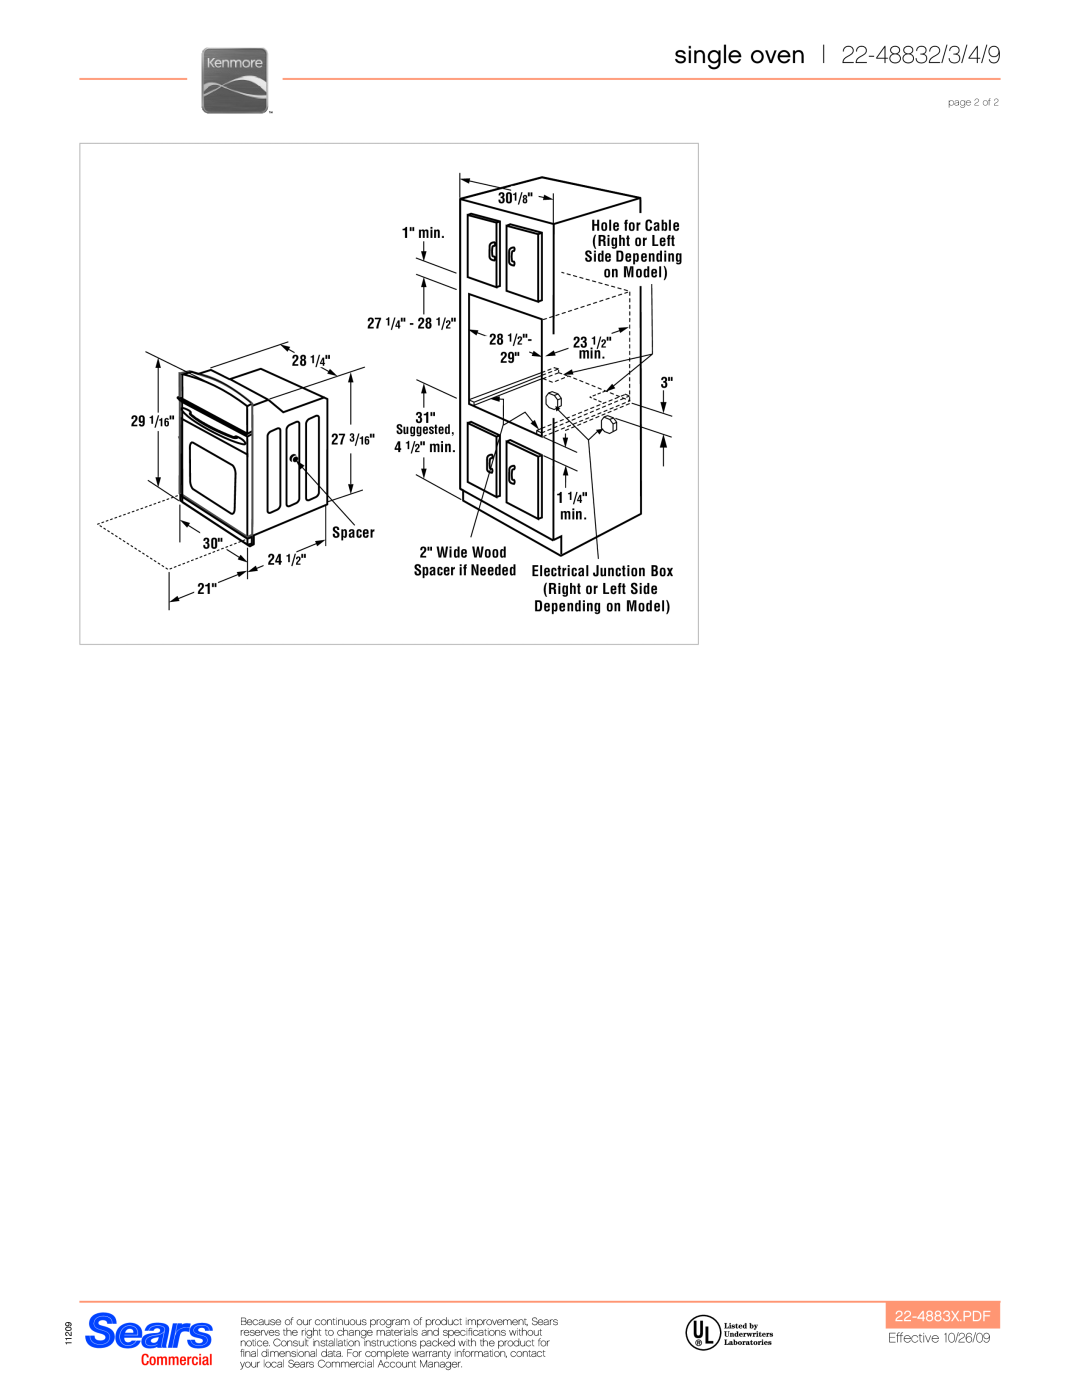 Kenmore 22-48834 single oven 22-48832/3/4/9, 22-4883X.PDF, Electrical Junction Box, Right or Left Side, 1 min, 29 1 